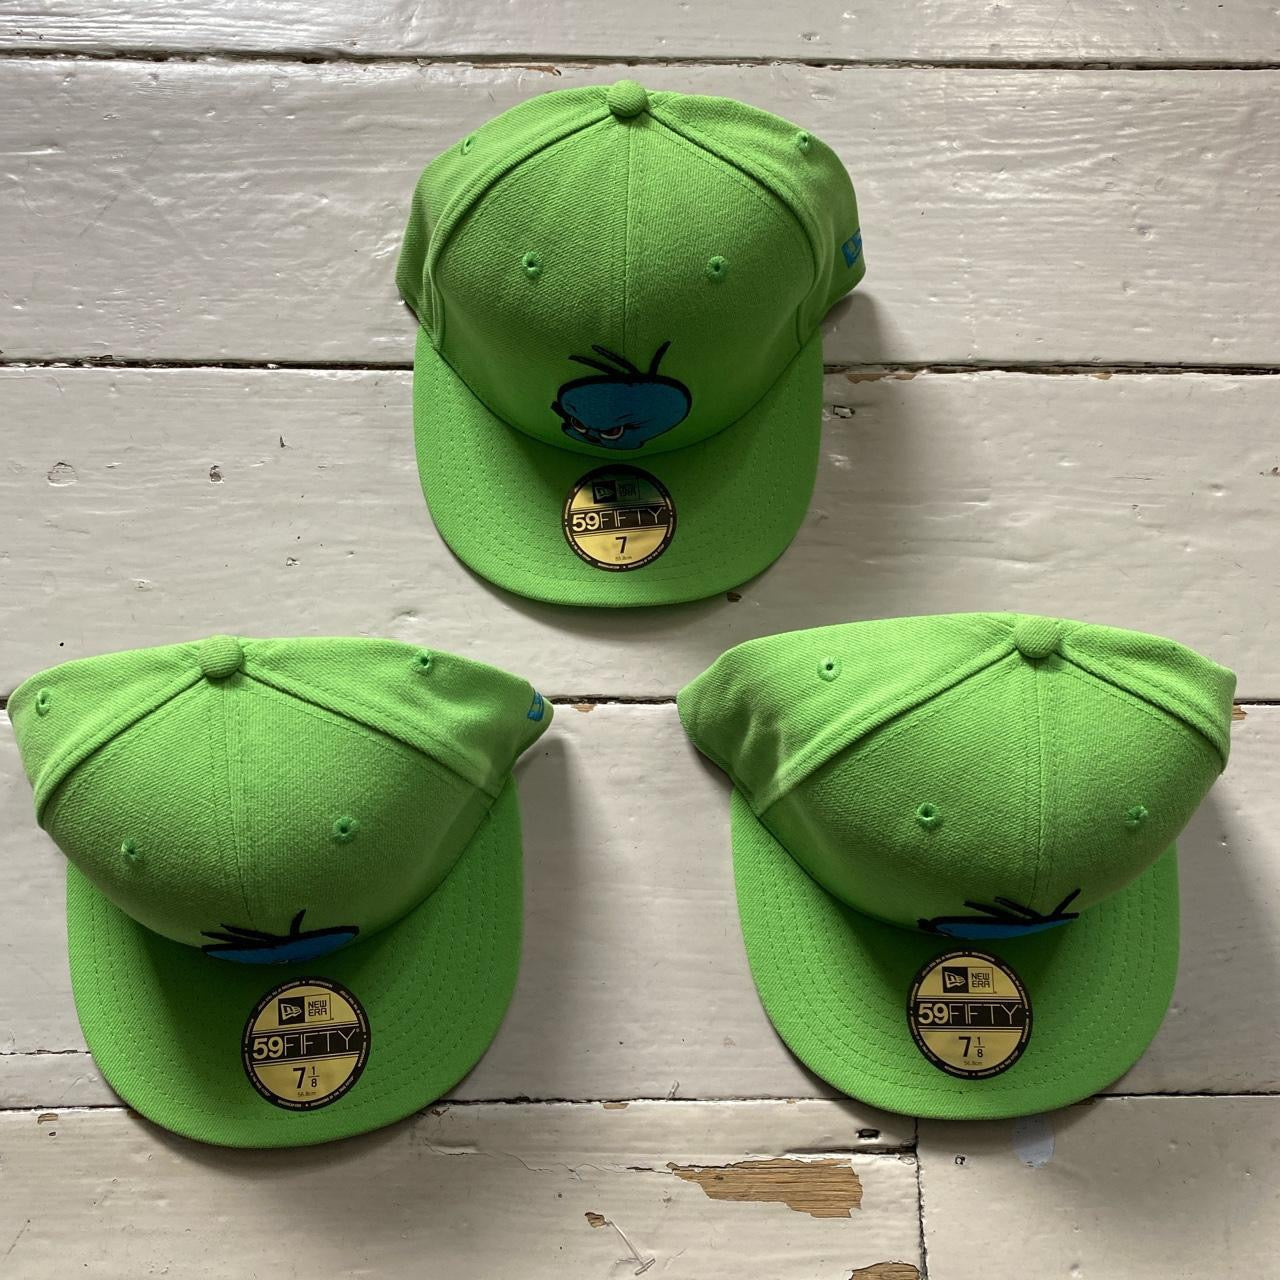 Tweety Looney Tunes Fitted Caps